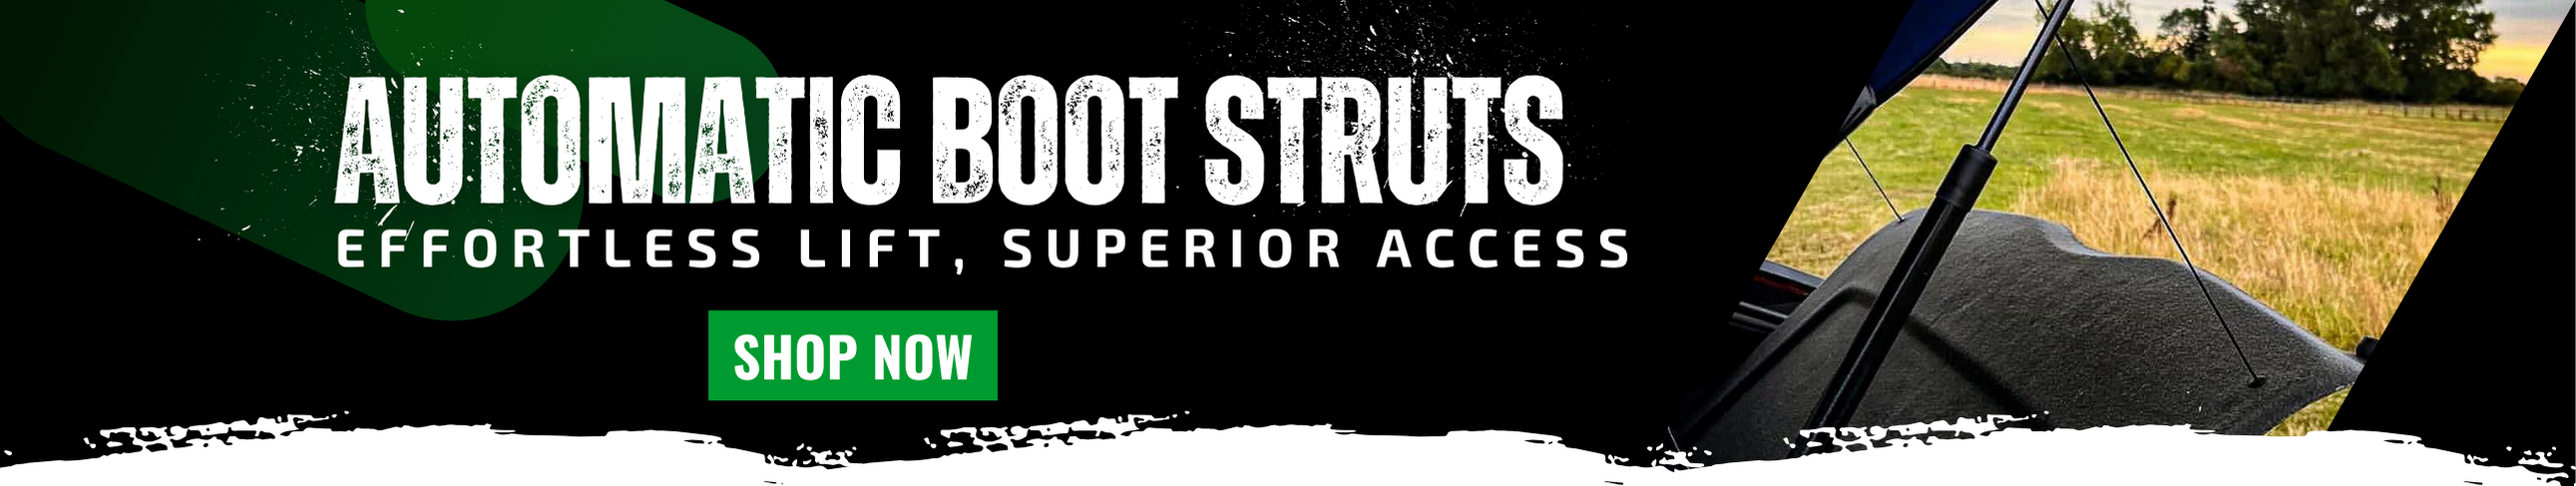 Ford Focus MK4 /4.5 Self Opening Automatic Boot Struts by Emerald Struts